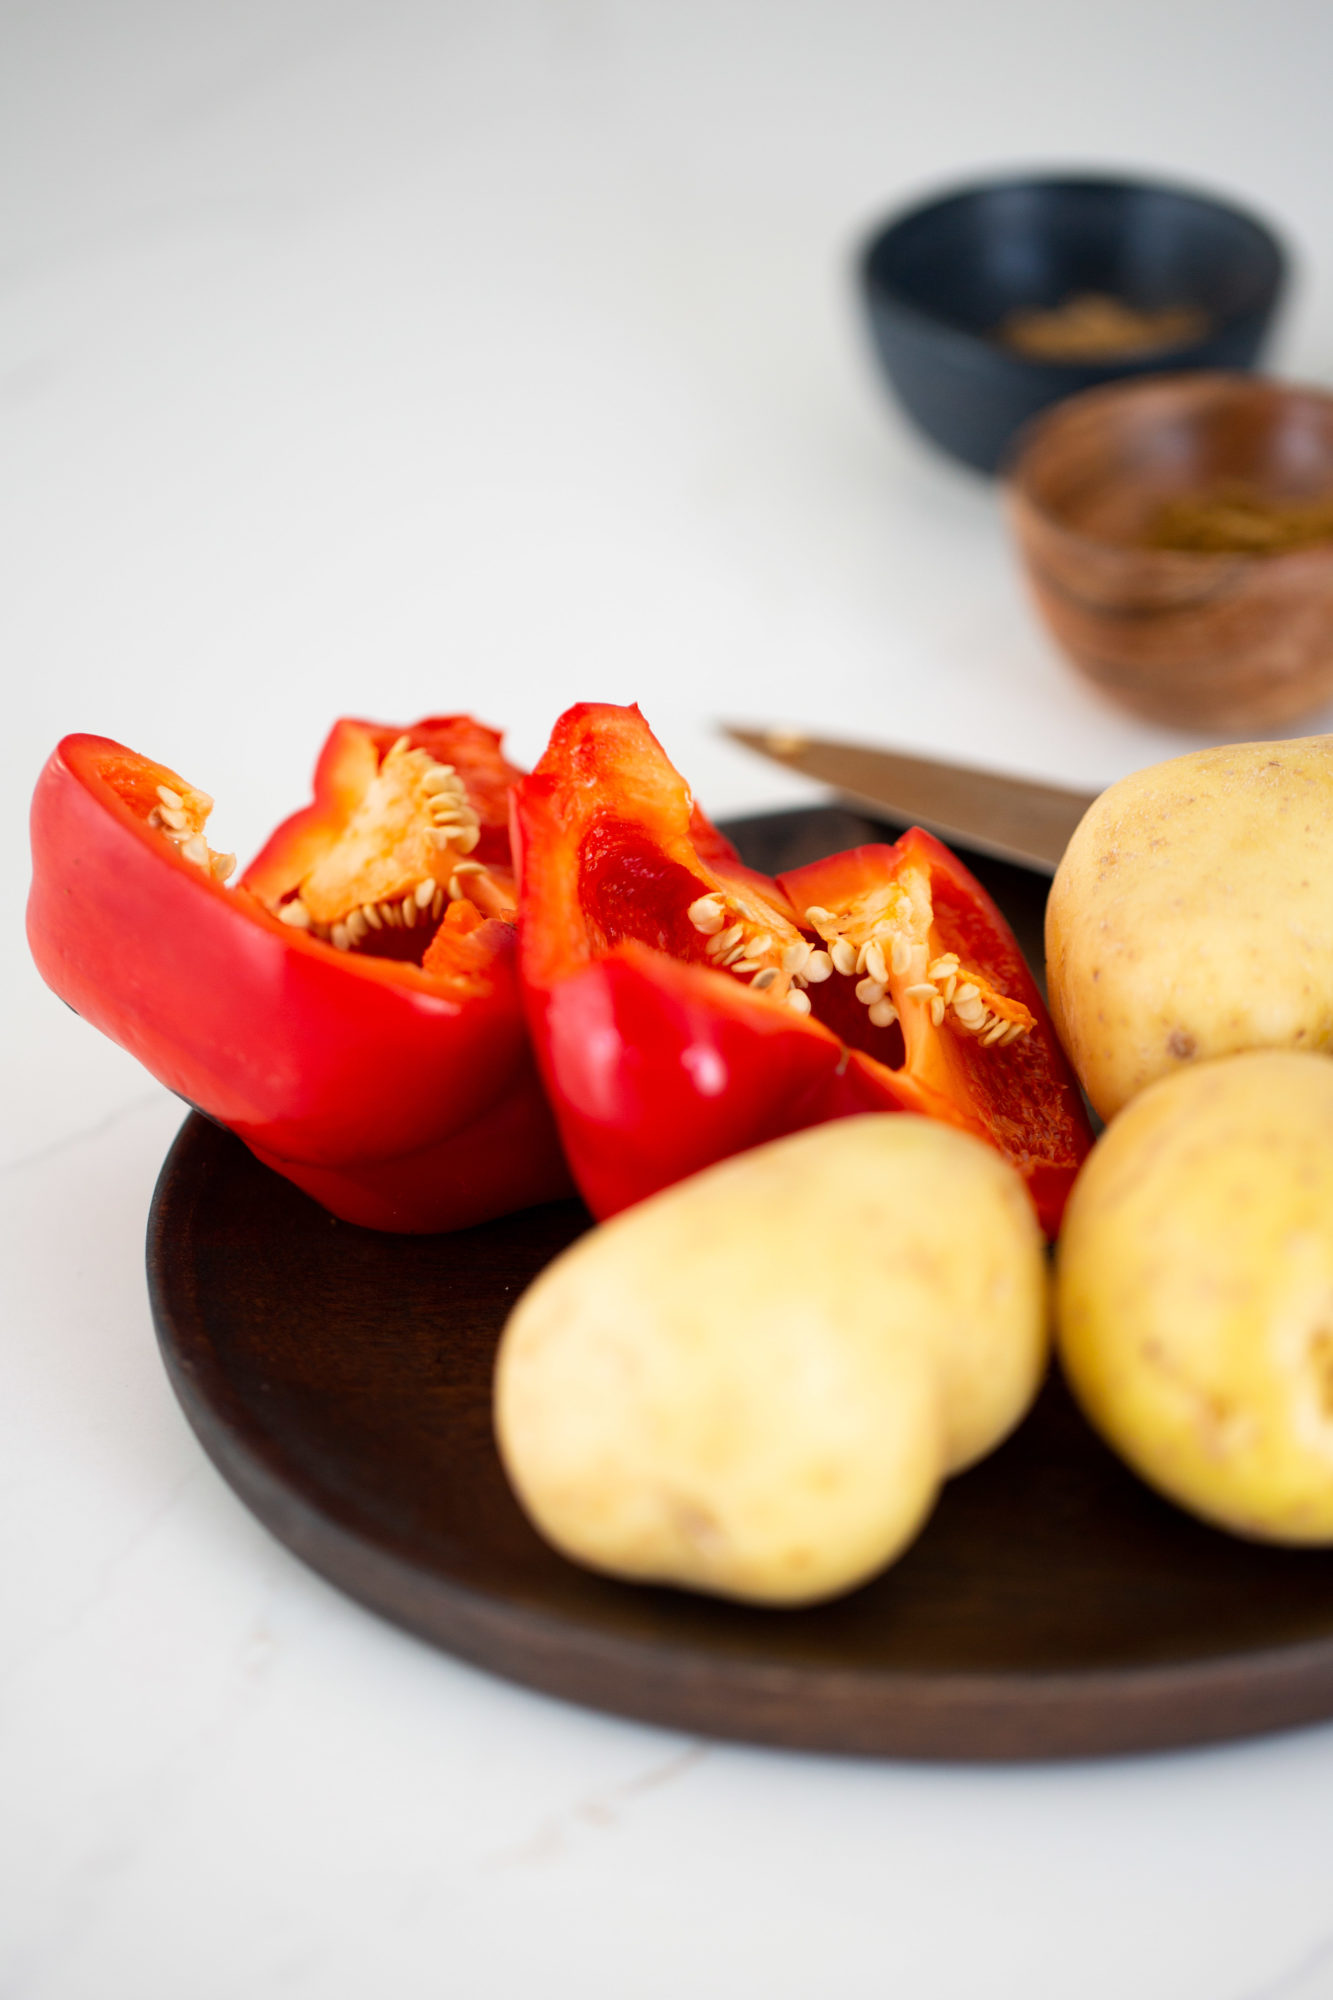 potatoes and red bell pepper cut in half